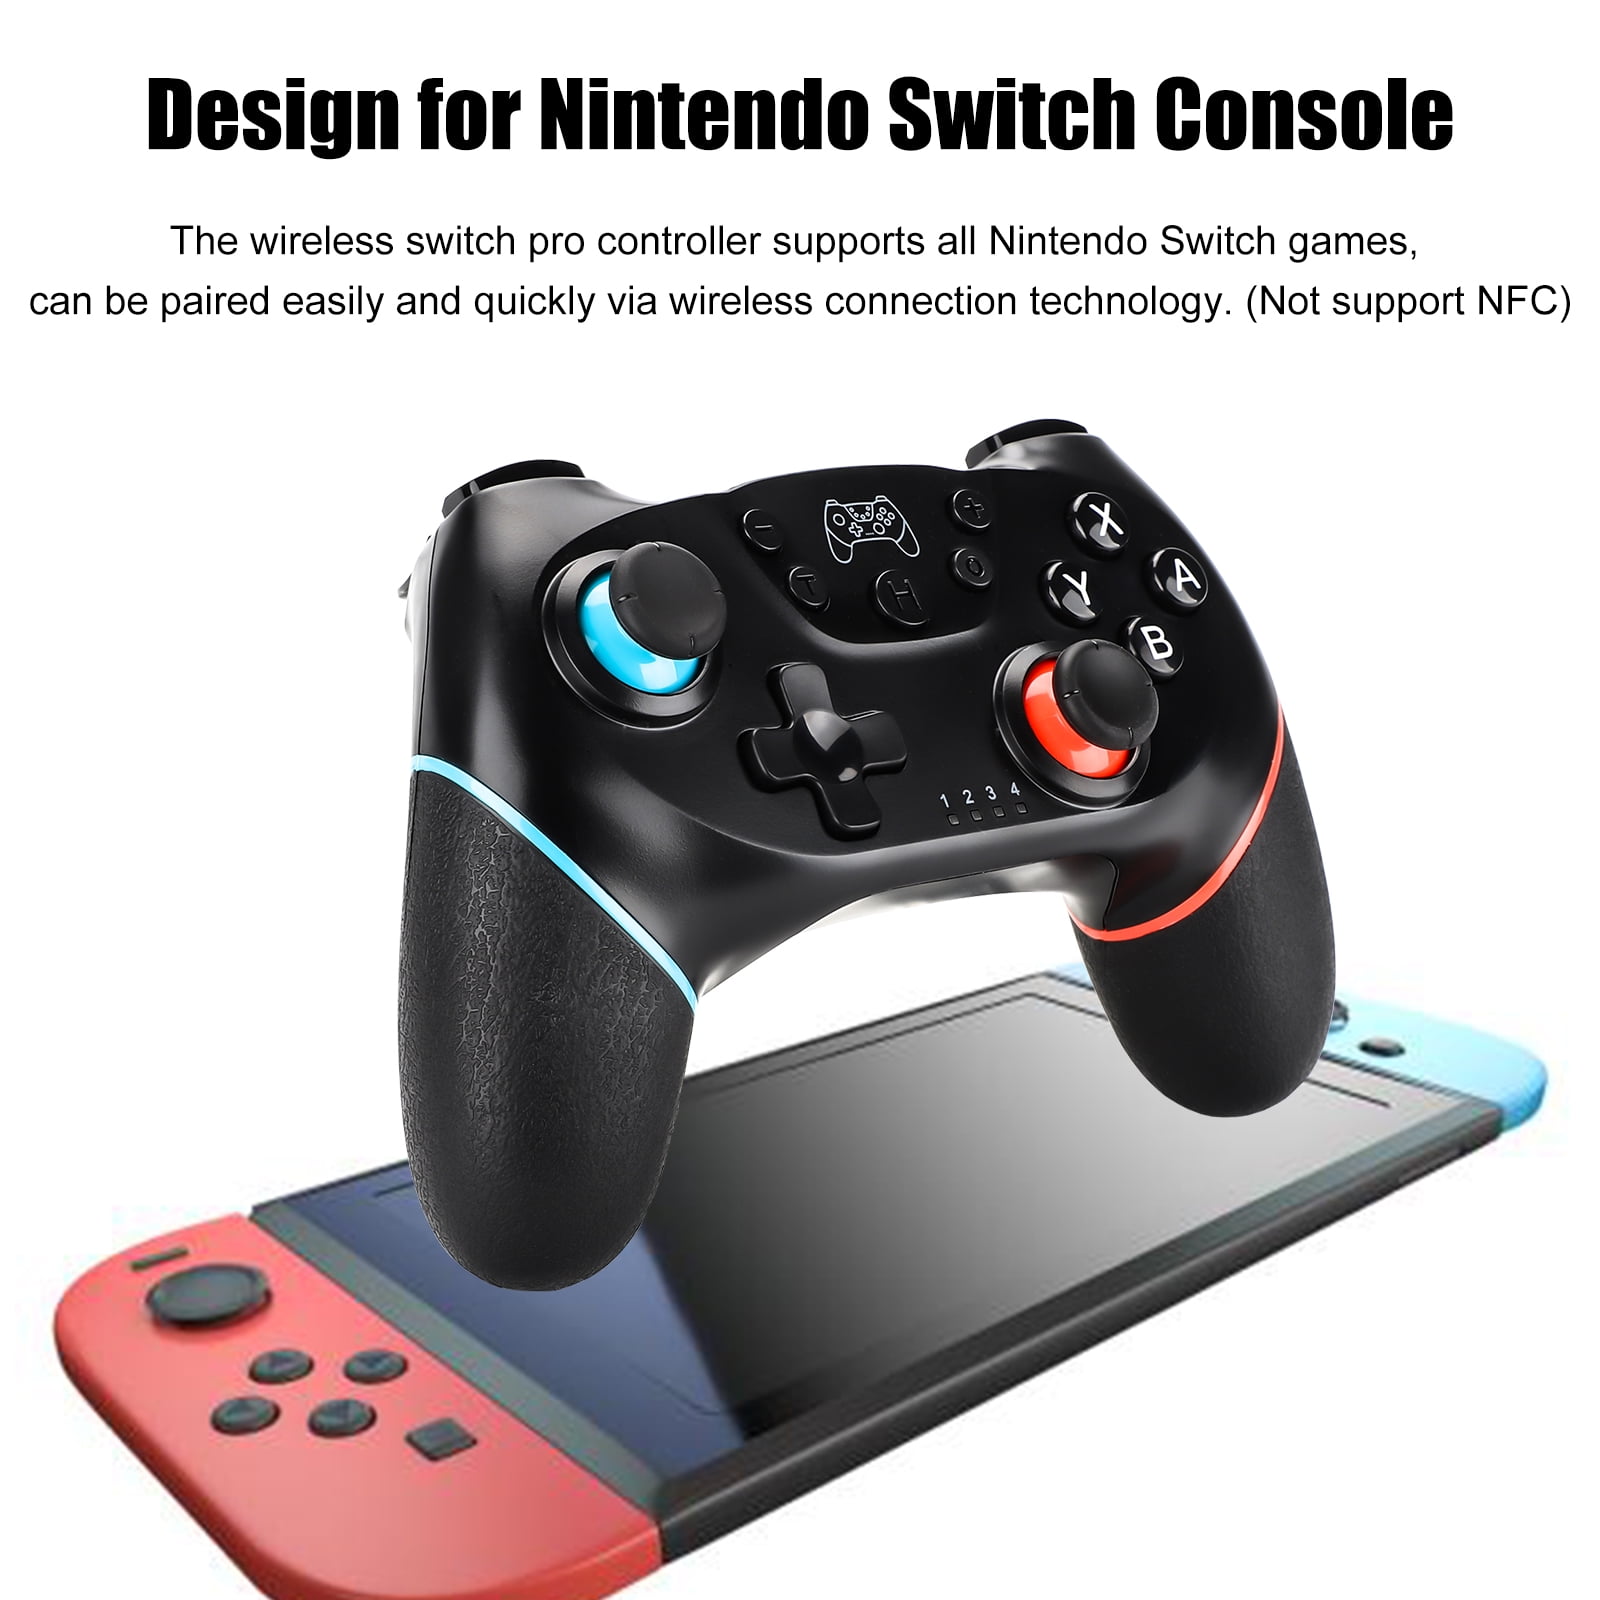 Wireless Controller Fit For Nintendo Switch Tsv Ergonomic Wireless Pro Controller Gamepad Dual Shock Remote Controller Joystick Compatible With Nintendo Switch Lite Walmart Com Walmart Com - controller supported roblox games list